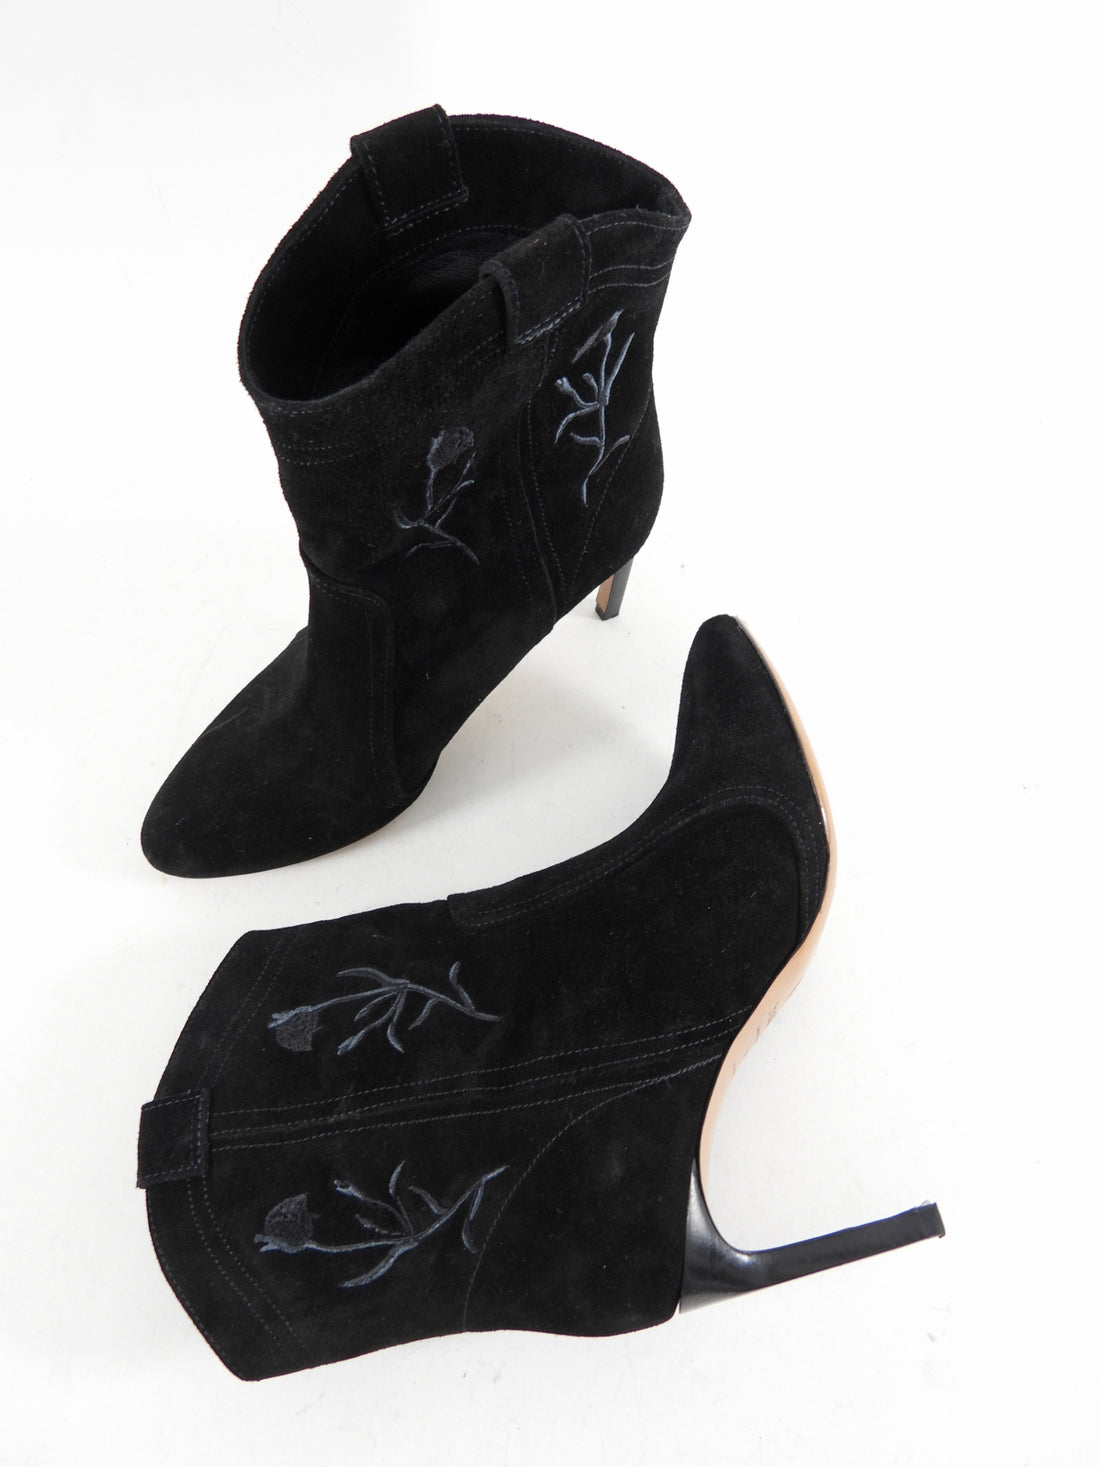 Bash black Suede Caitlin Western Ankle Boot - 37